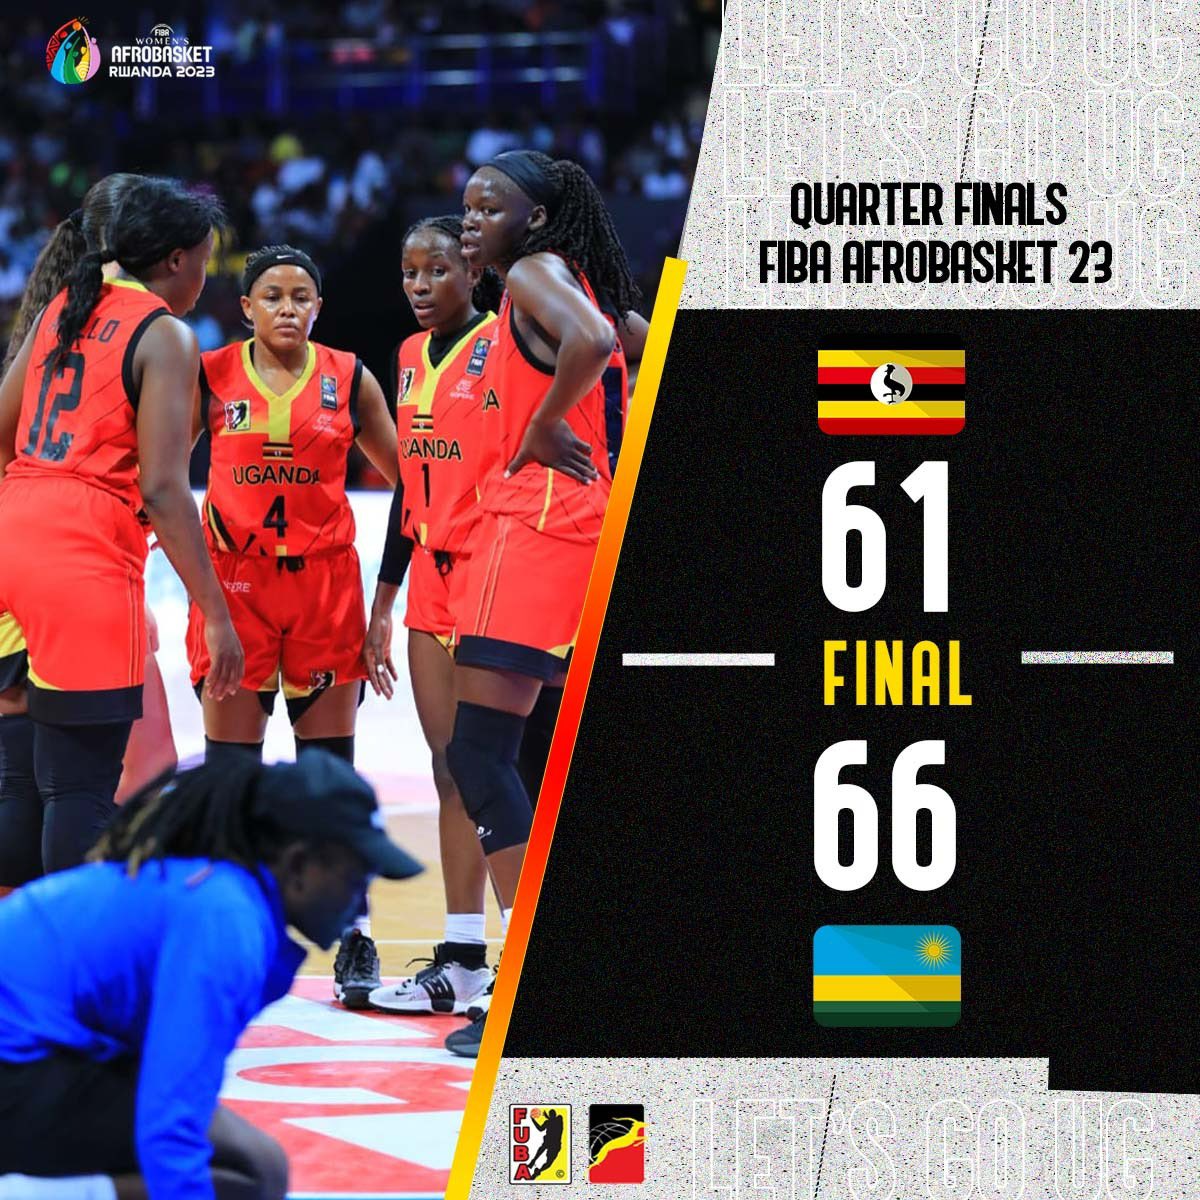 Take a bow, Ladies!

You gave a tremendous account of yourselves!

Your team spirit & chemistry on & off the court united us more than ever!

You made us believe that we can dare greatly, shake off old ghosts and slay giants!

It is NOT the end of the road! 

#GazellesBasketball